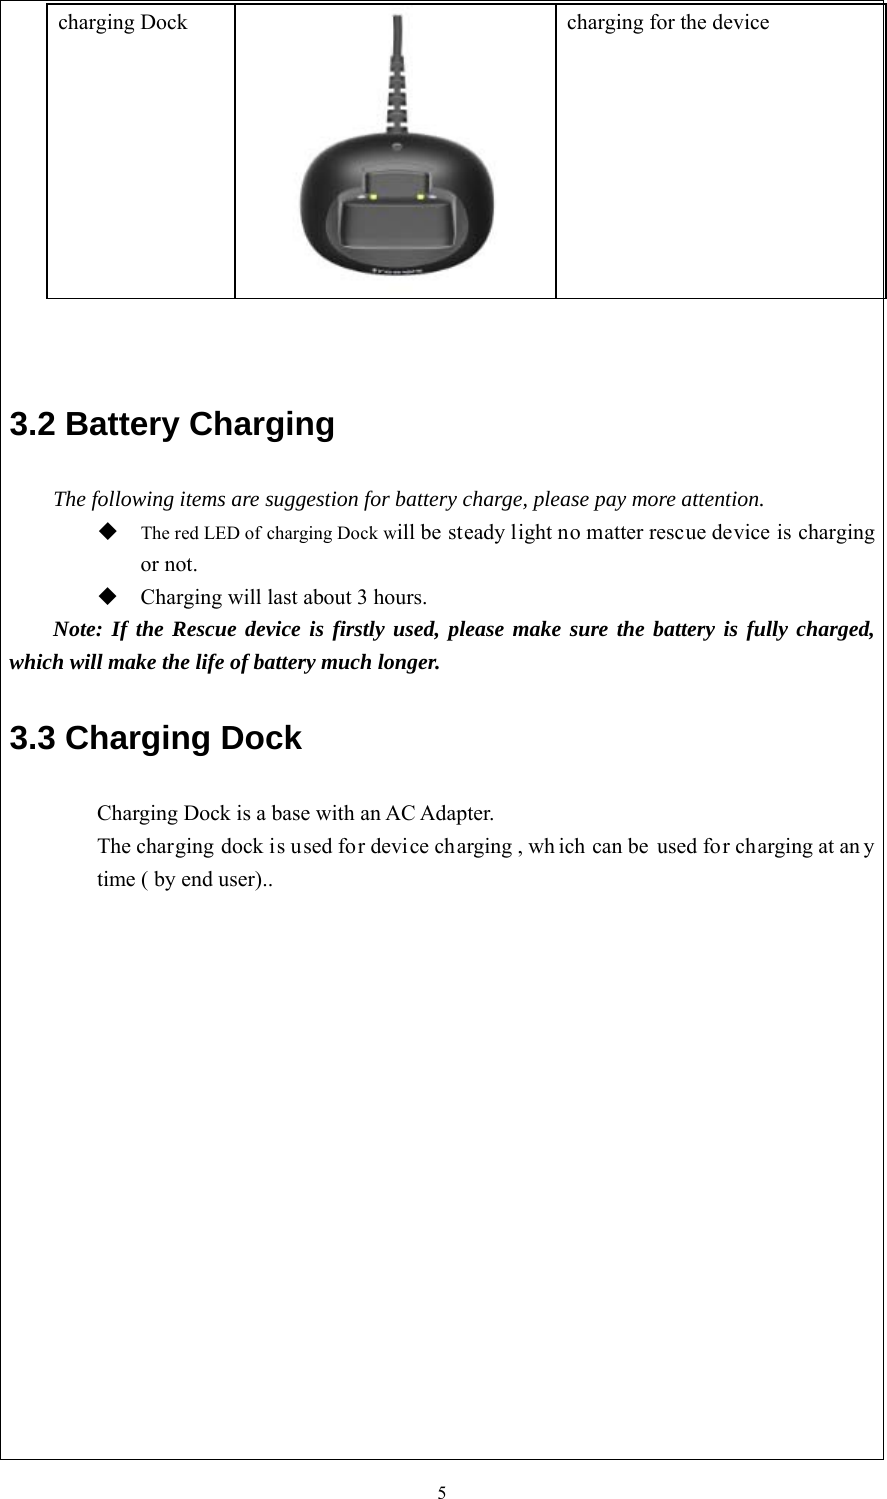 5charging Dock    charging for the device 3.2 Battery Charging The following items are suggestion for battery charge, please pay more attention. The red LED of charging Dock will be steady light no matter rescue device is chargingor not.Charging will last about 3 hours.Note: If the Rescue device is firstly used, please make sure the battery is fully charged, which will make the life of battery much longer. 3.3 Charging Dock Charging Dock is a base with an AC Adapter.   The charging dock is used for device charging , wh ich can be used for charging at an y time ( by end user).. 